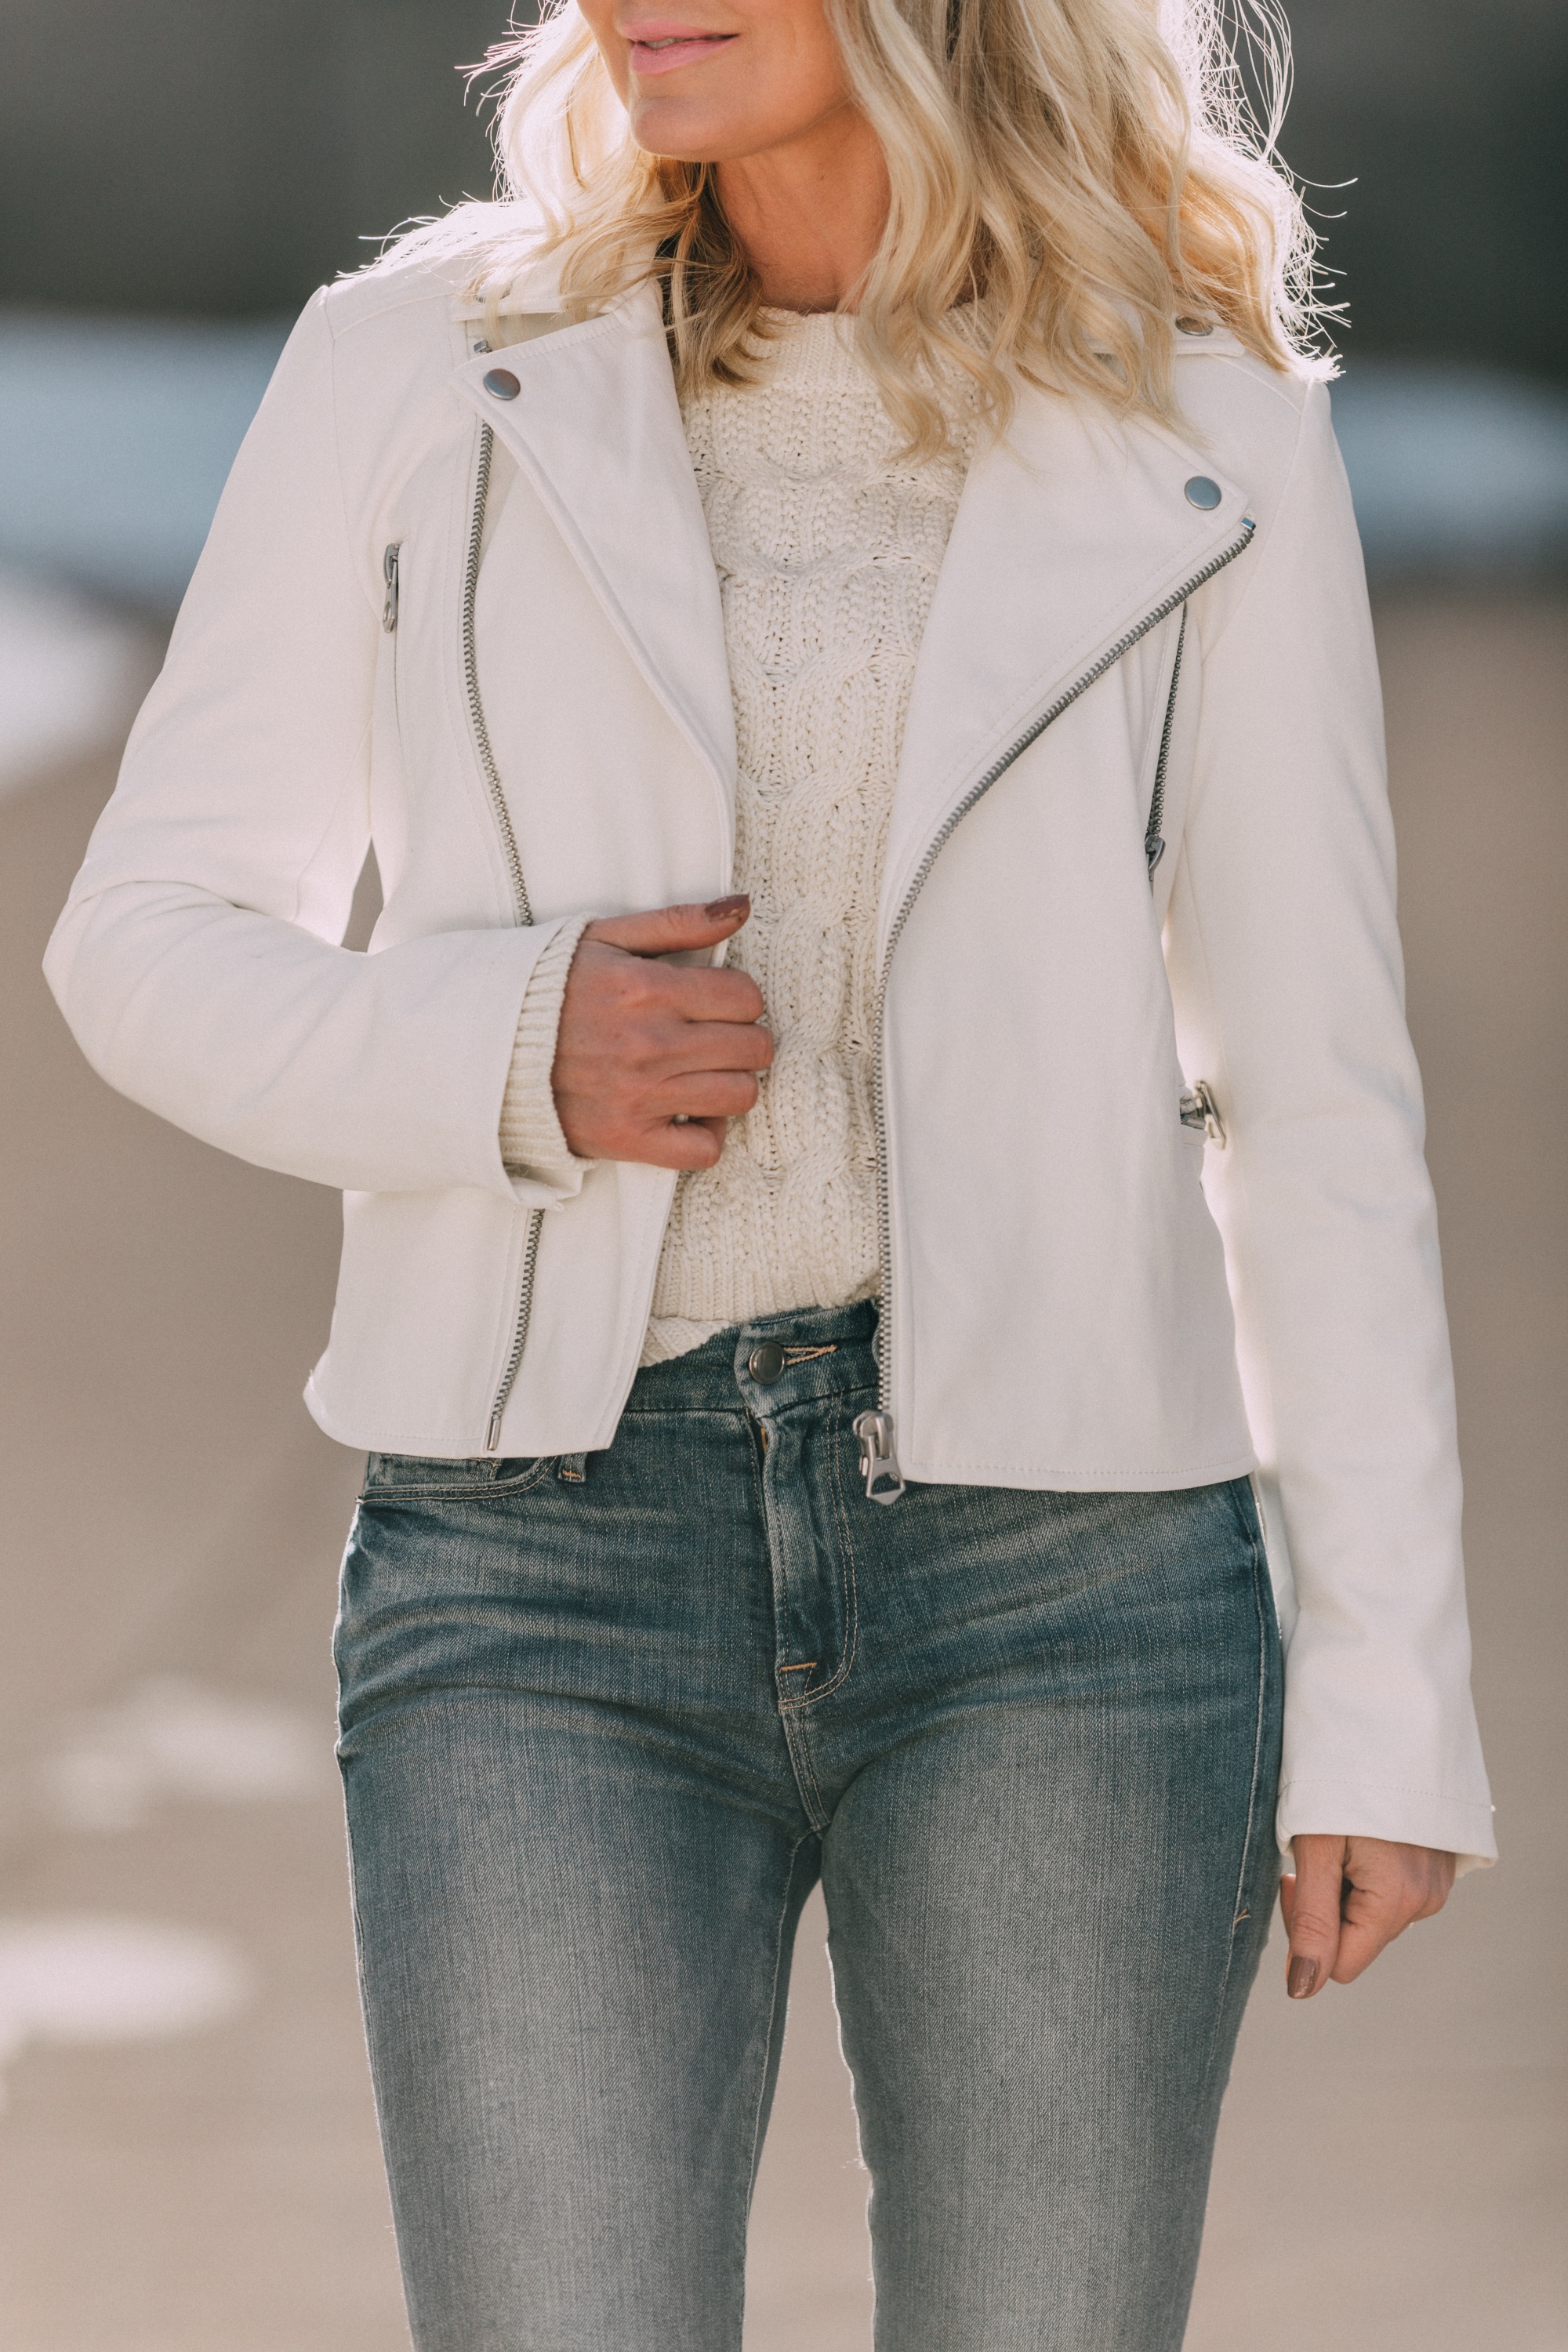 walmart scoop fashion blogger wearing white faux leather moto jacket, white cable knit sweater and medium wash skinny jeans in Telluride, Colorado